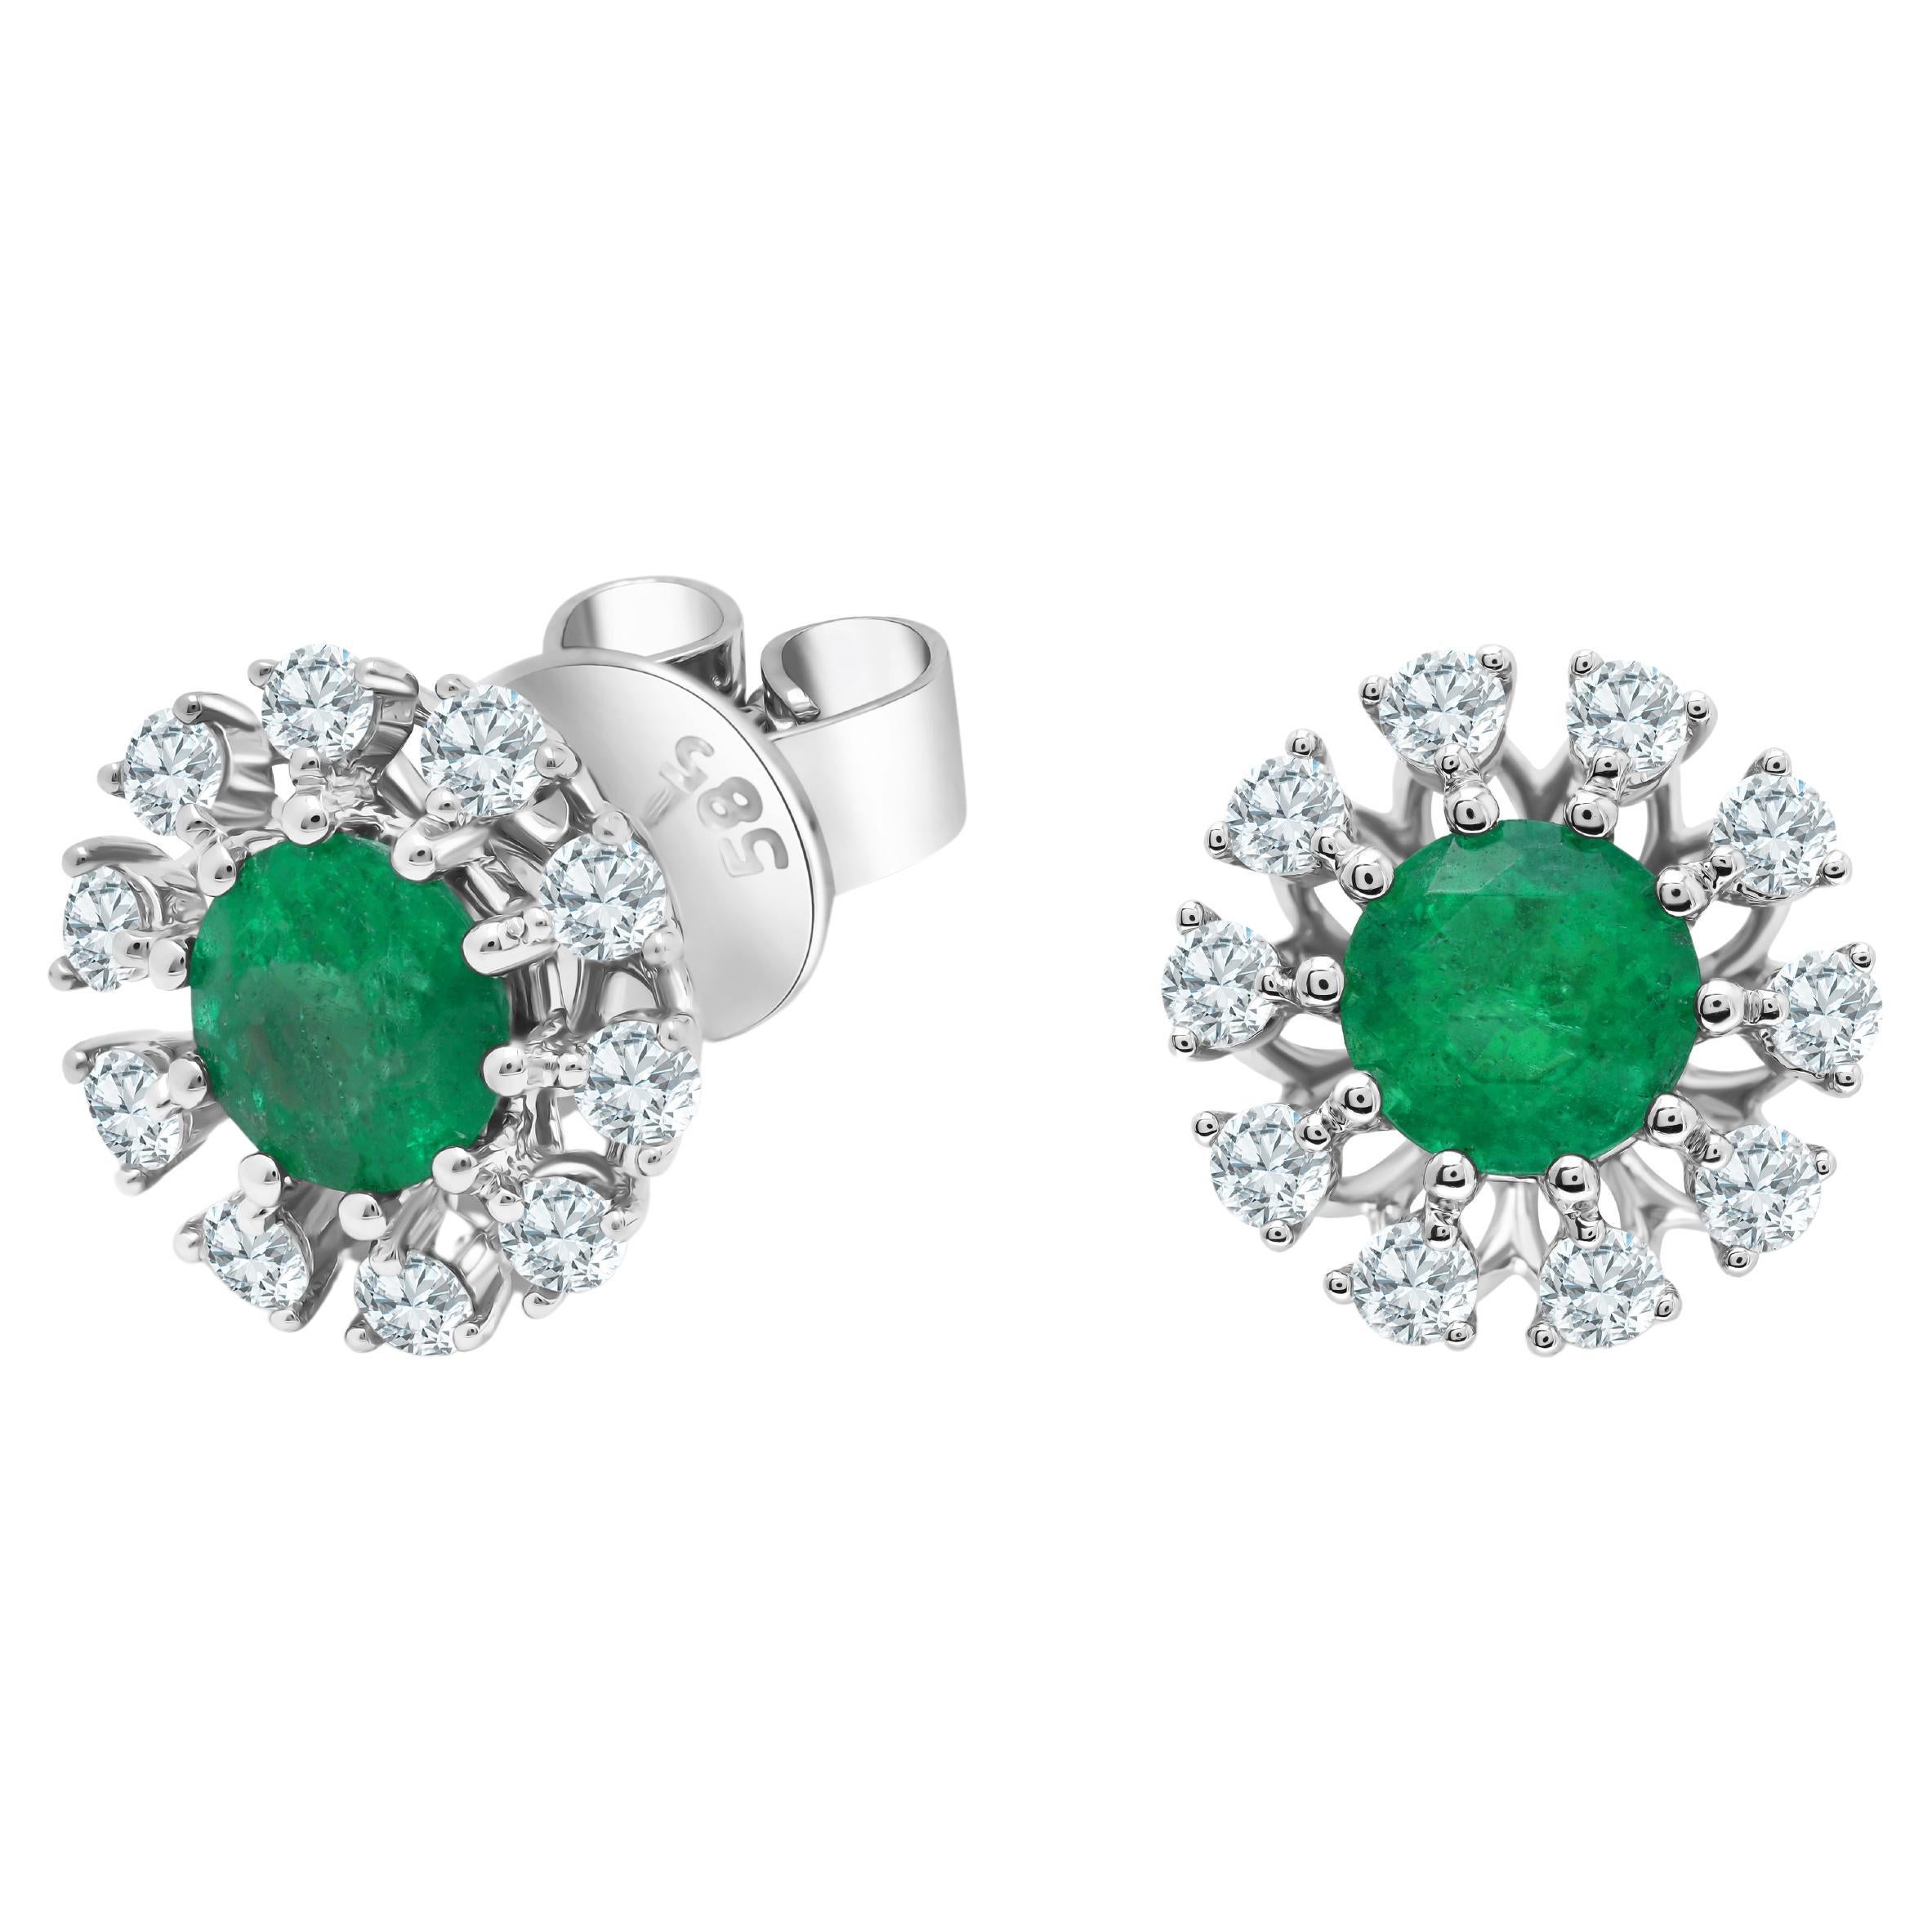 1.08 Carat Round Emerald and 0.5 Carat Natural Diamond Earrings in 14W ref2155 For Sale